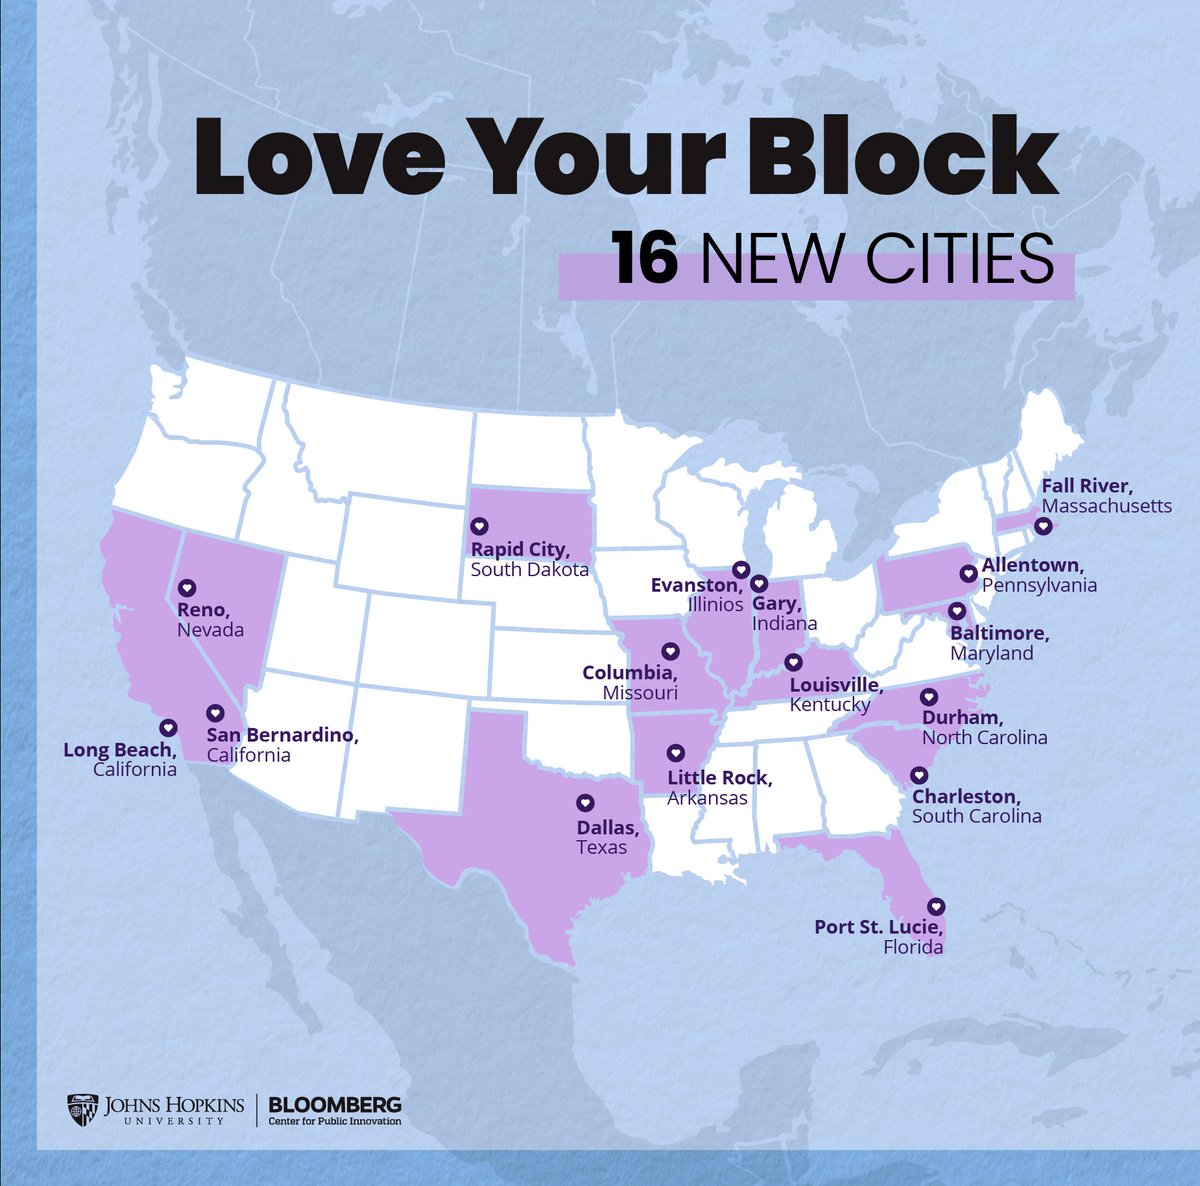 The Bloomberg Center for Public Innovation at Johns Hopkins University has announced the City of Port St. Lucie will receive #LoveYourBlock grants to fund resident-led, neighborhood revitalization projects in communities across the City. 🤩

As one of 16 newly selected U.S.